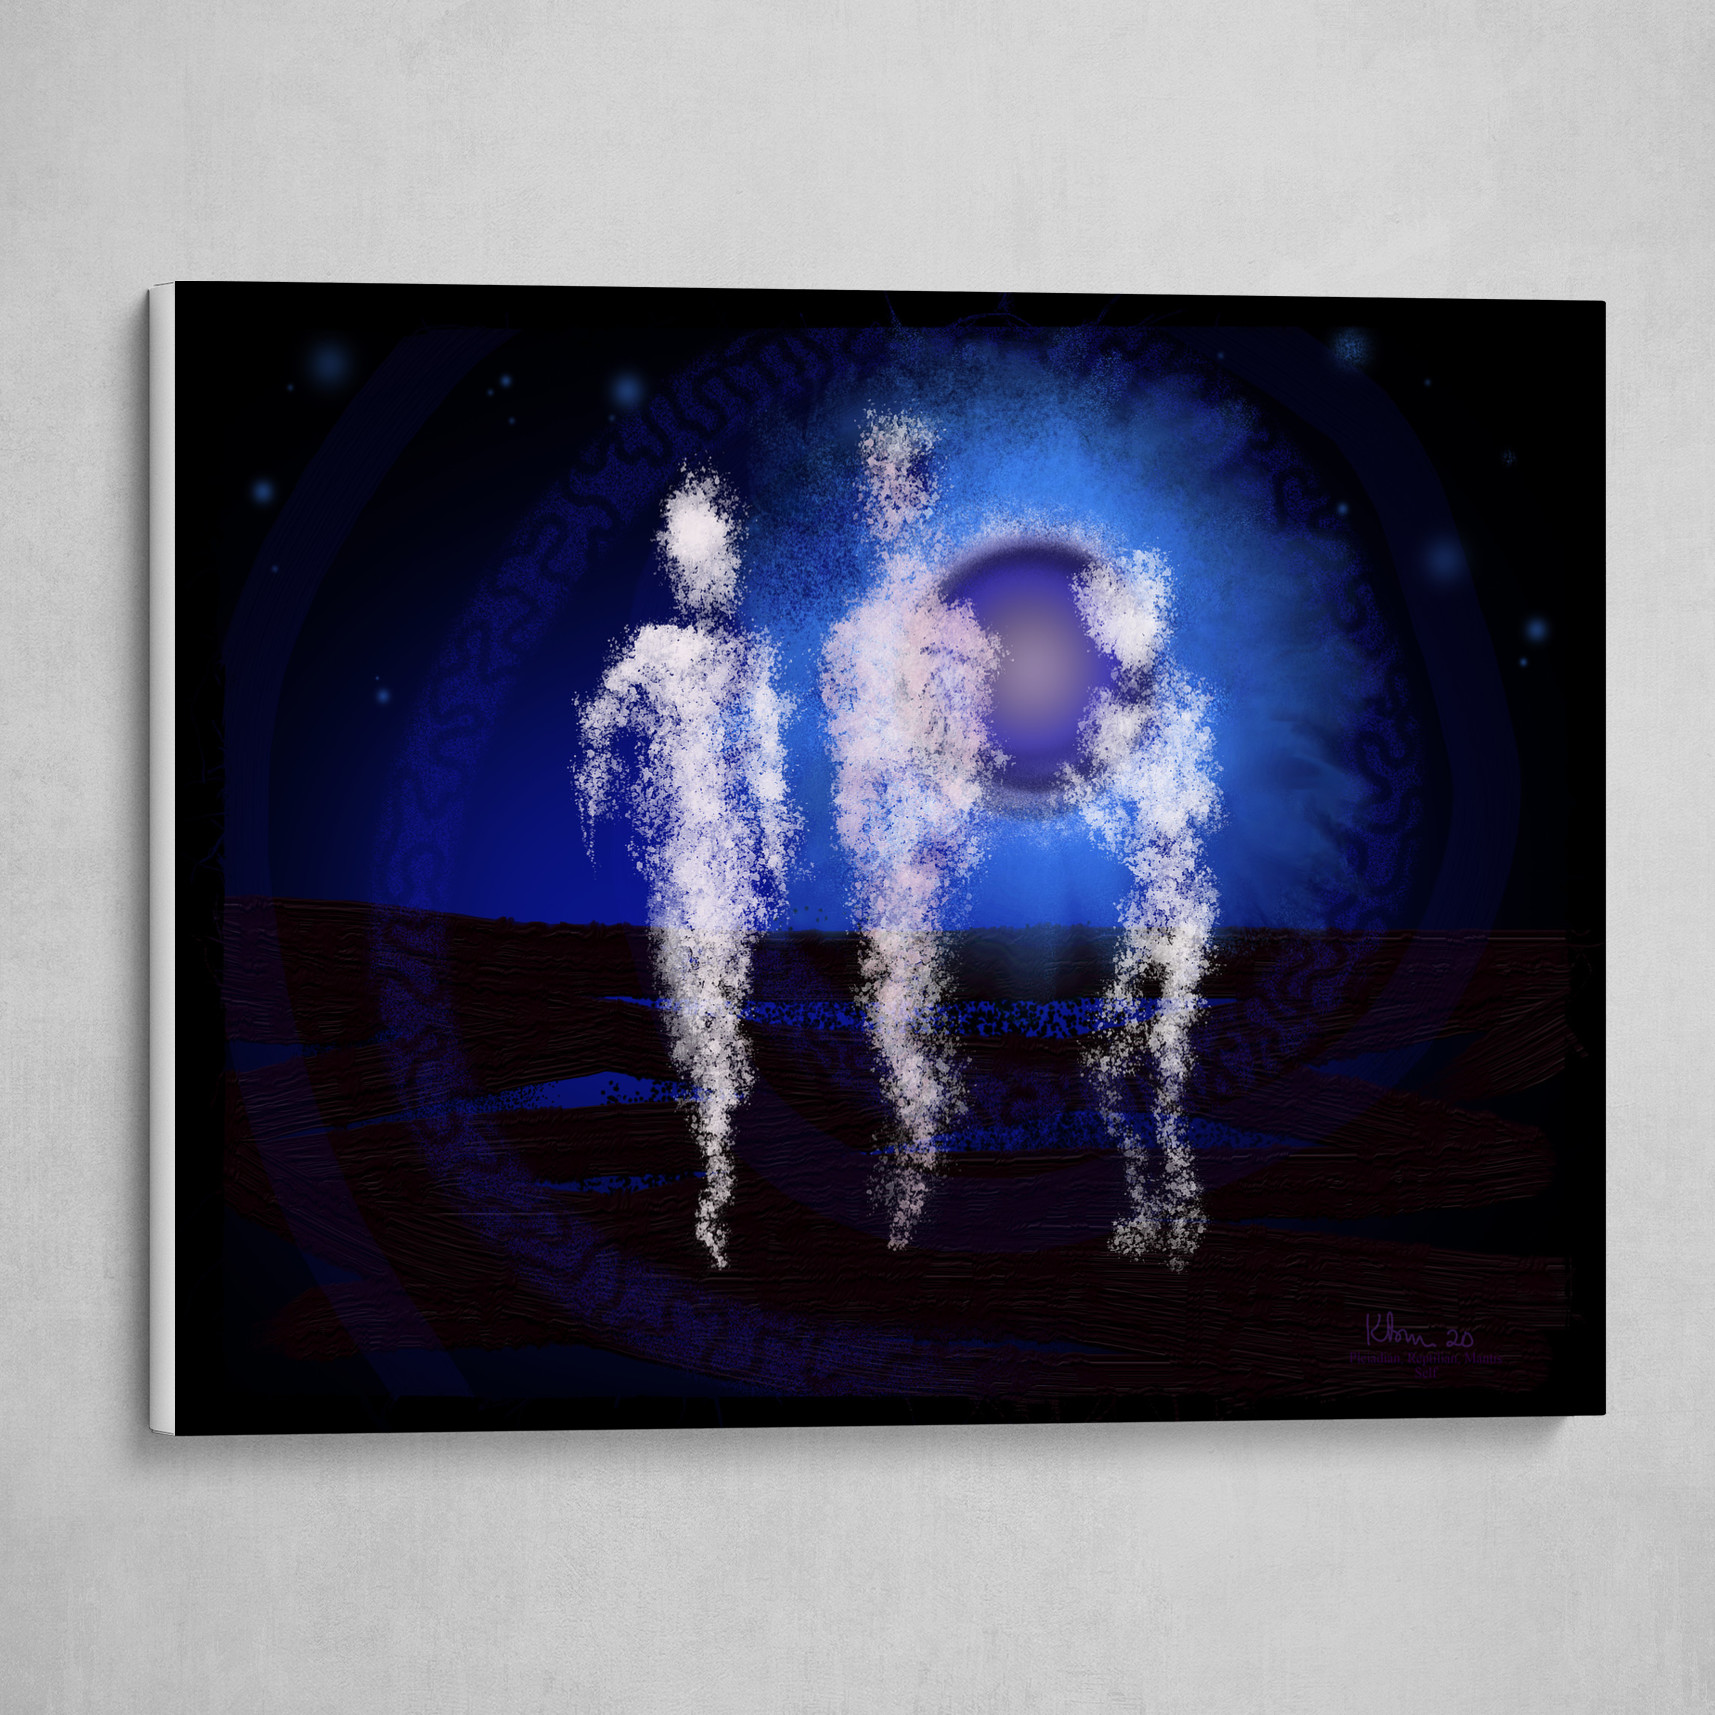 Live Galactic Models (4) :: Channeled Extraterrestrial Art